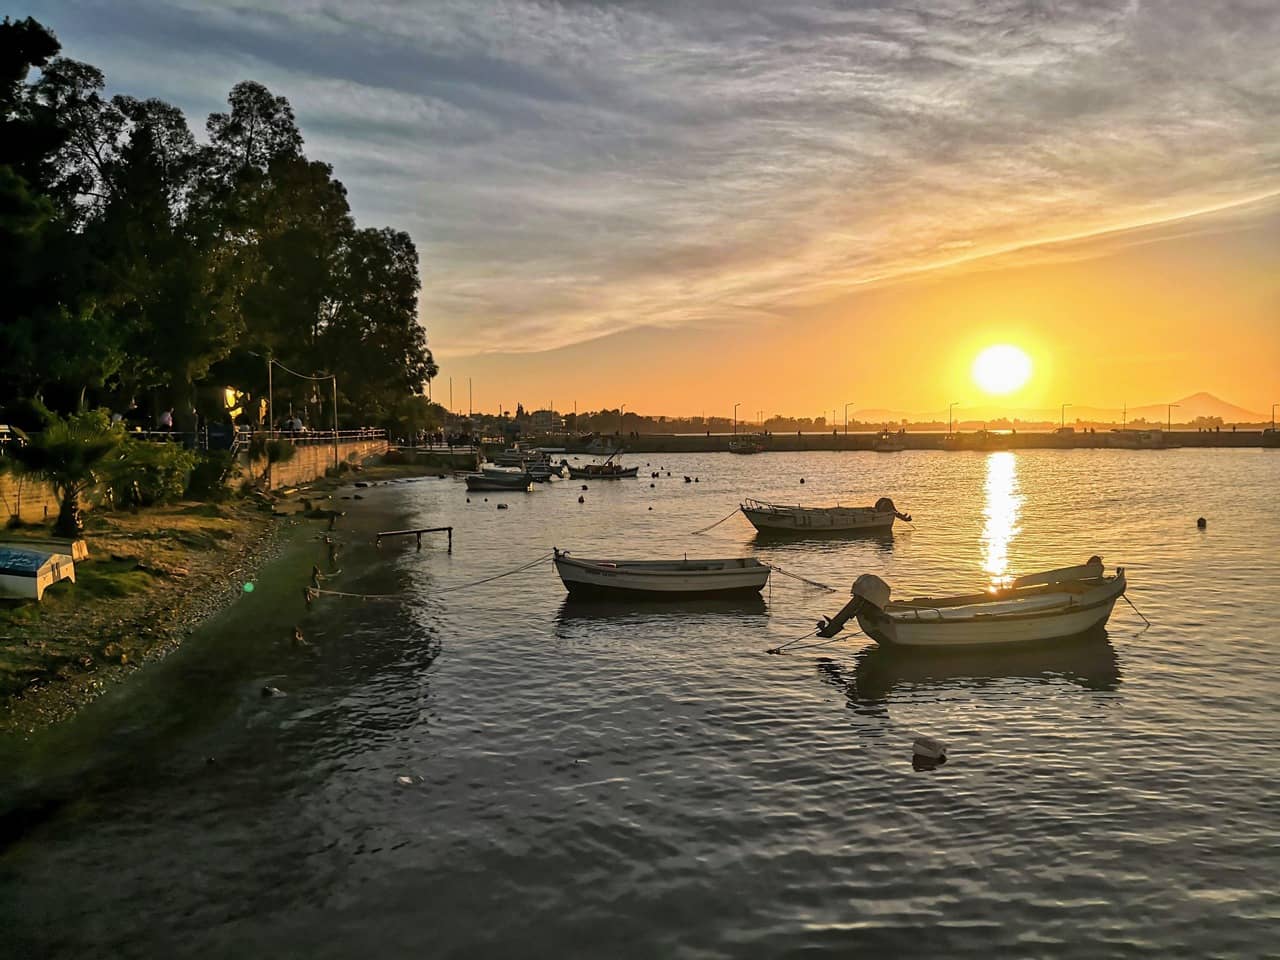 Sunset view with parked fishing boats